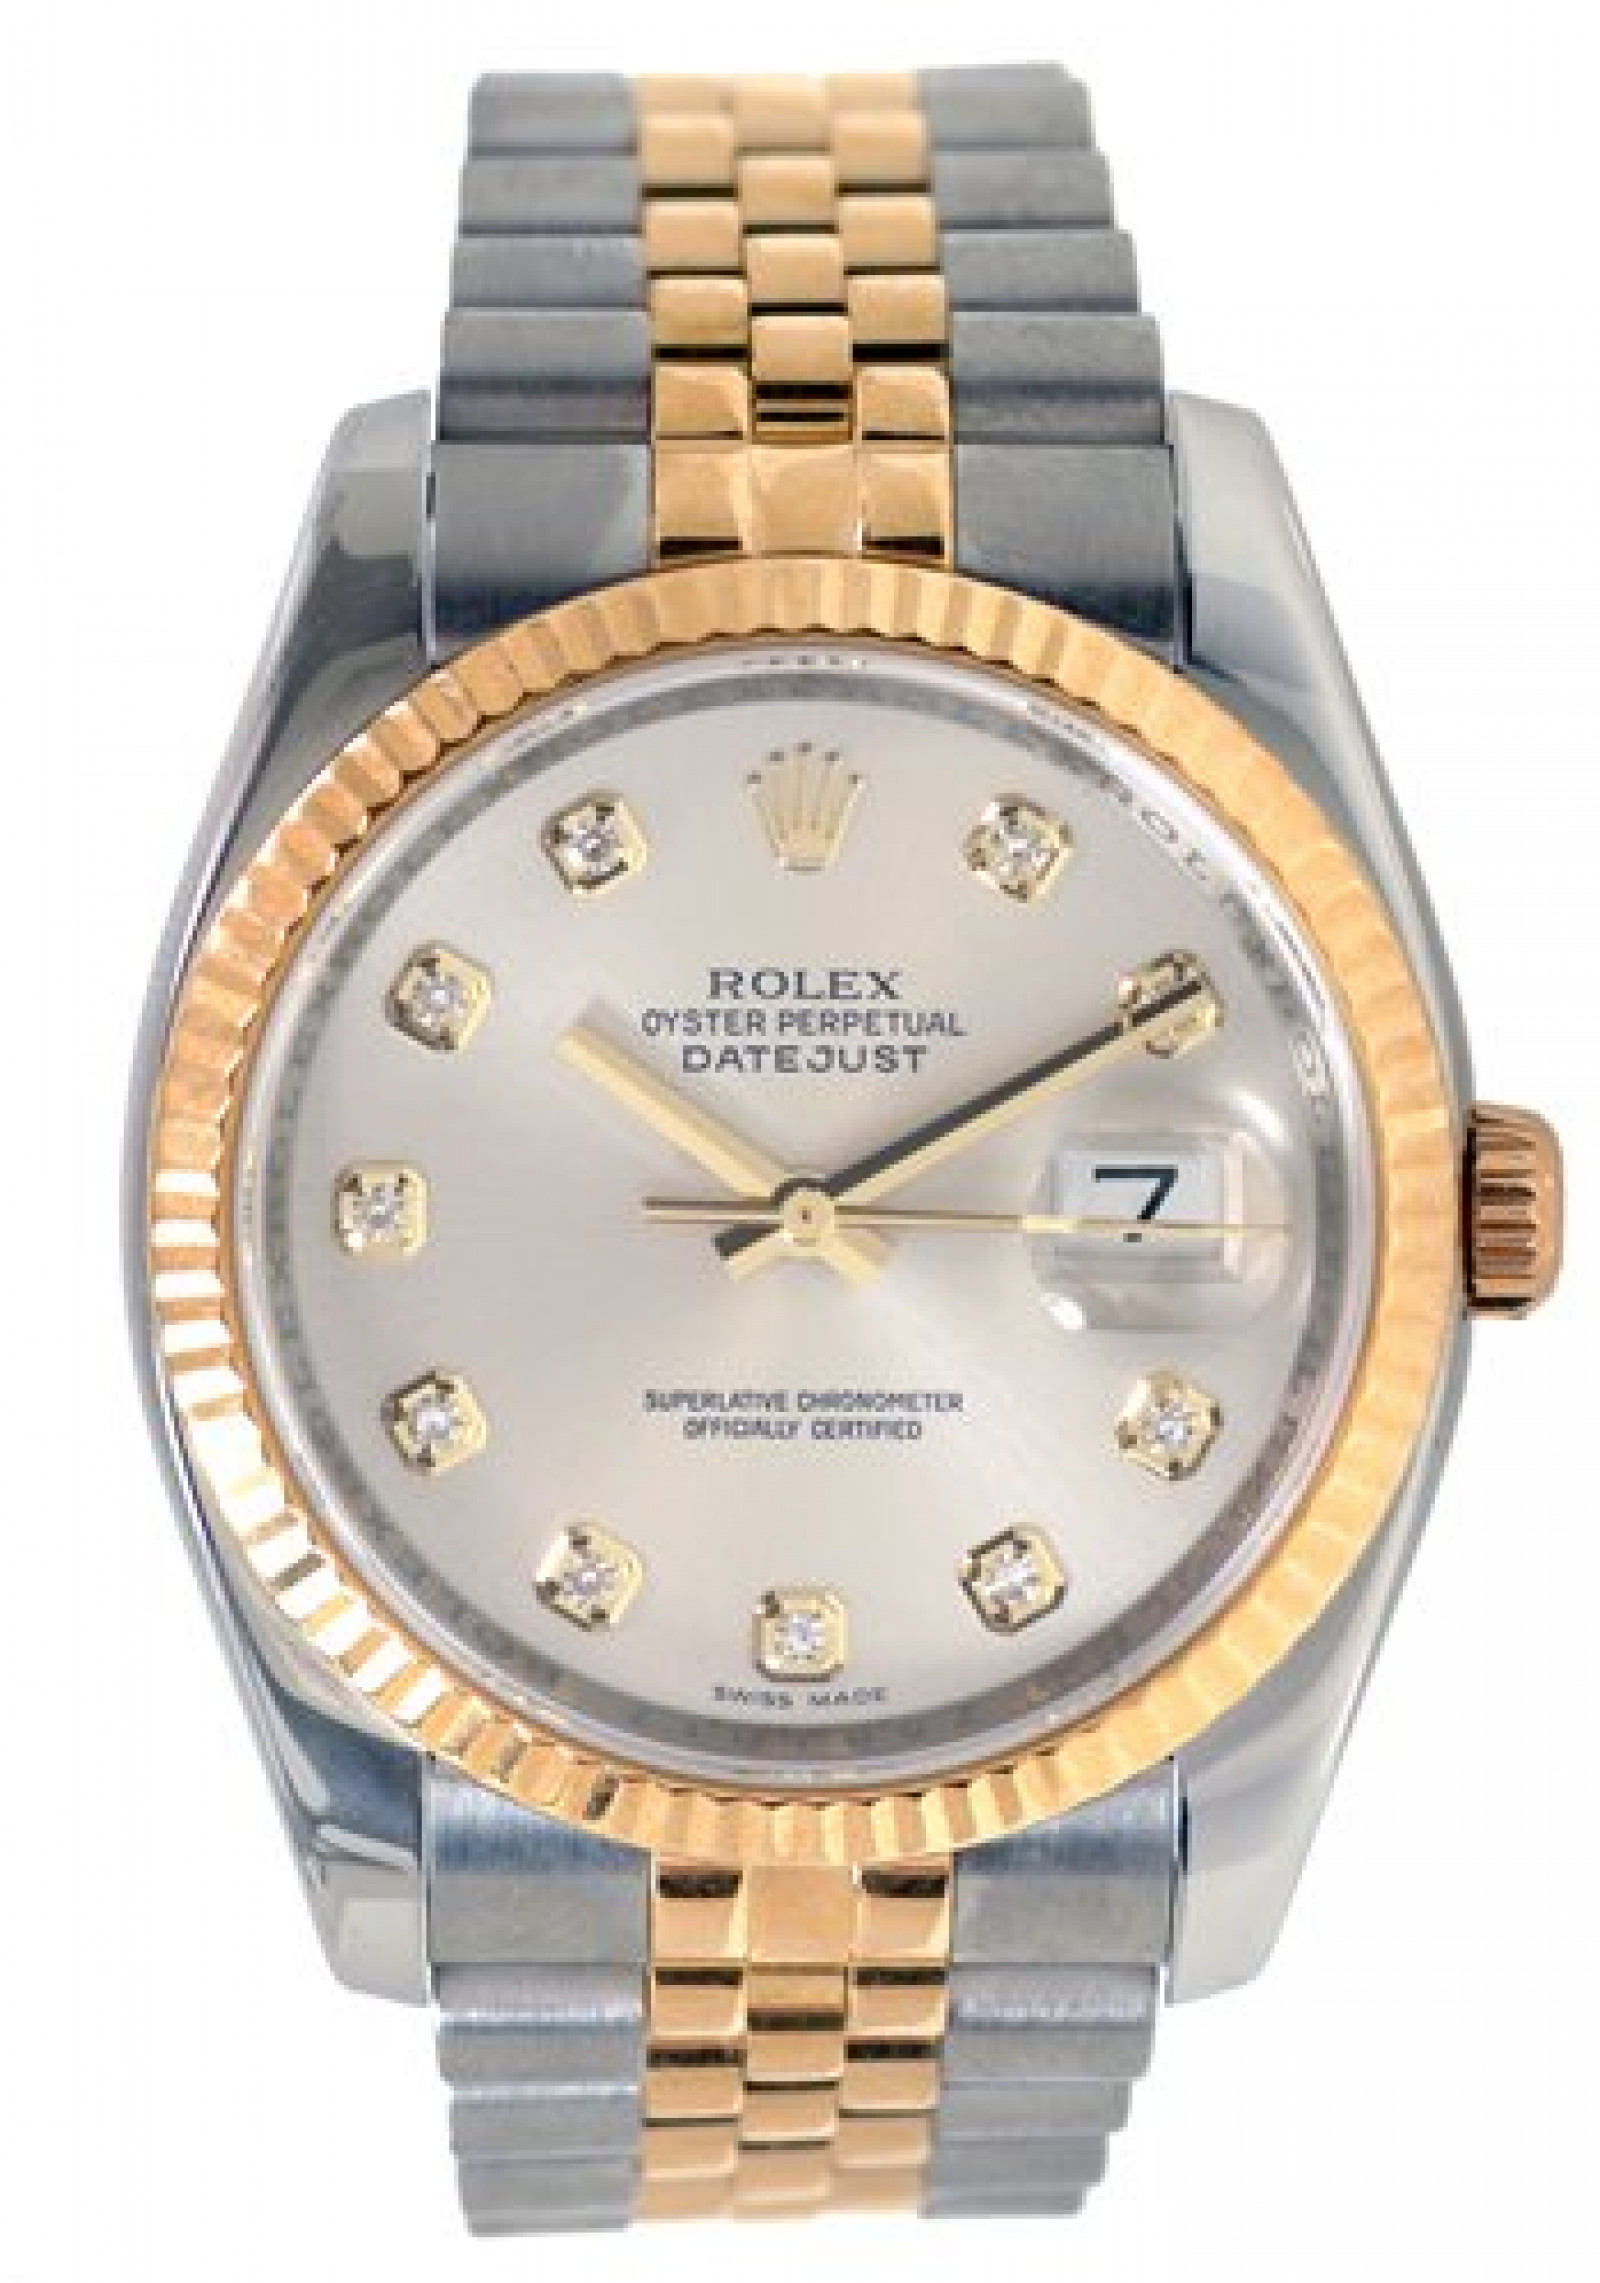 Rolex Datejust 116233 with Diamonds on Silver Dial